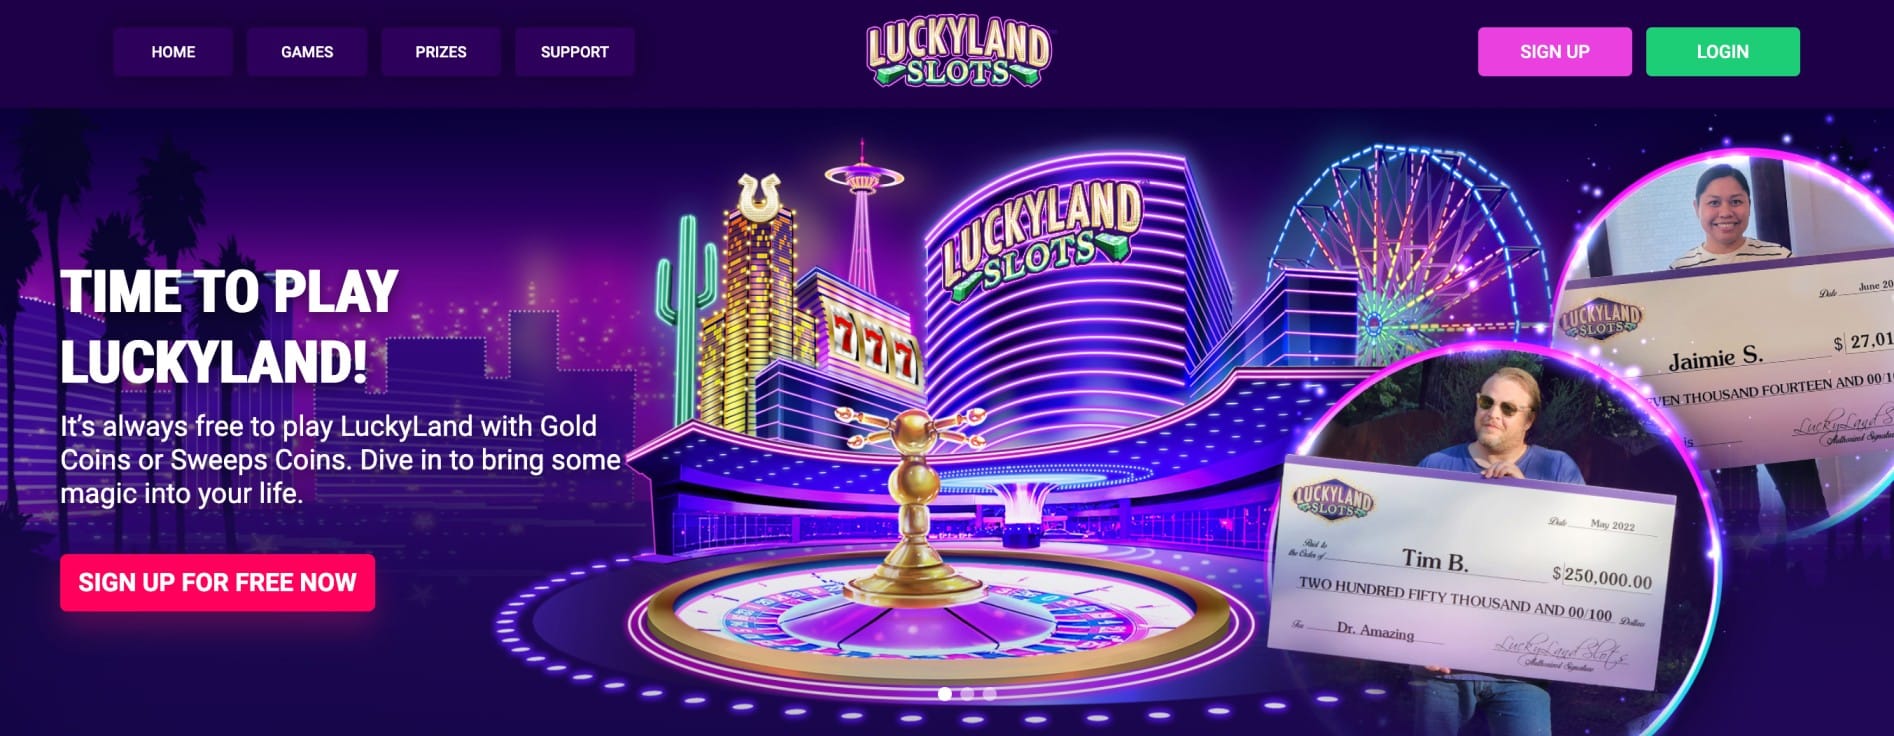 Free Sweeps Coins Luckyland Slots